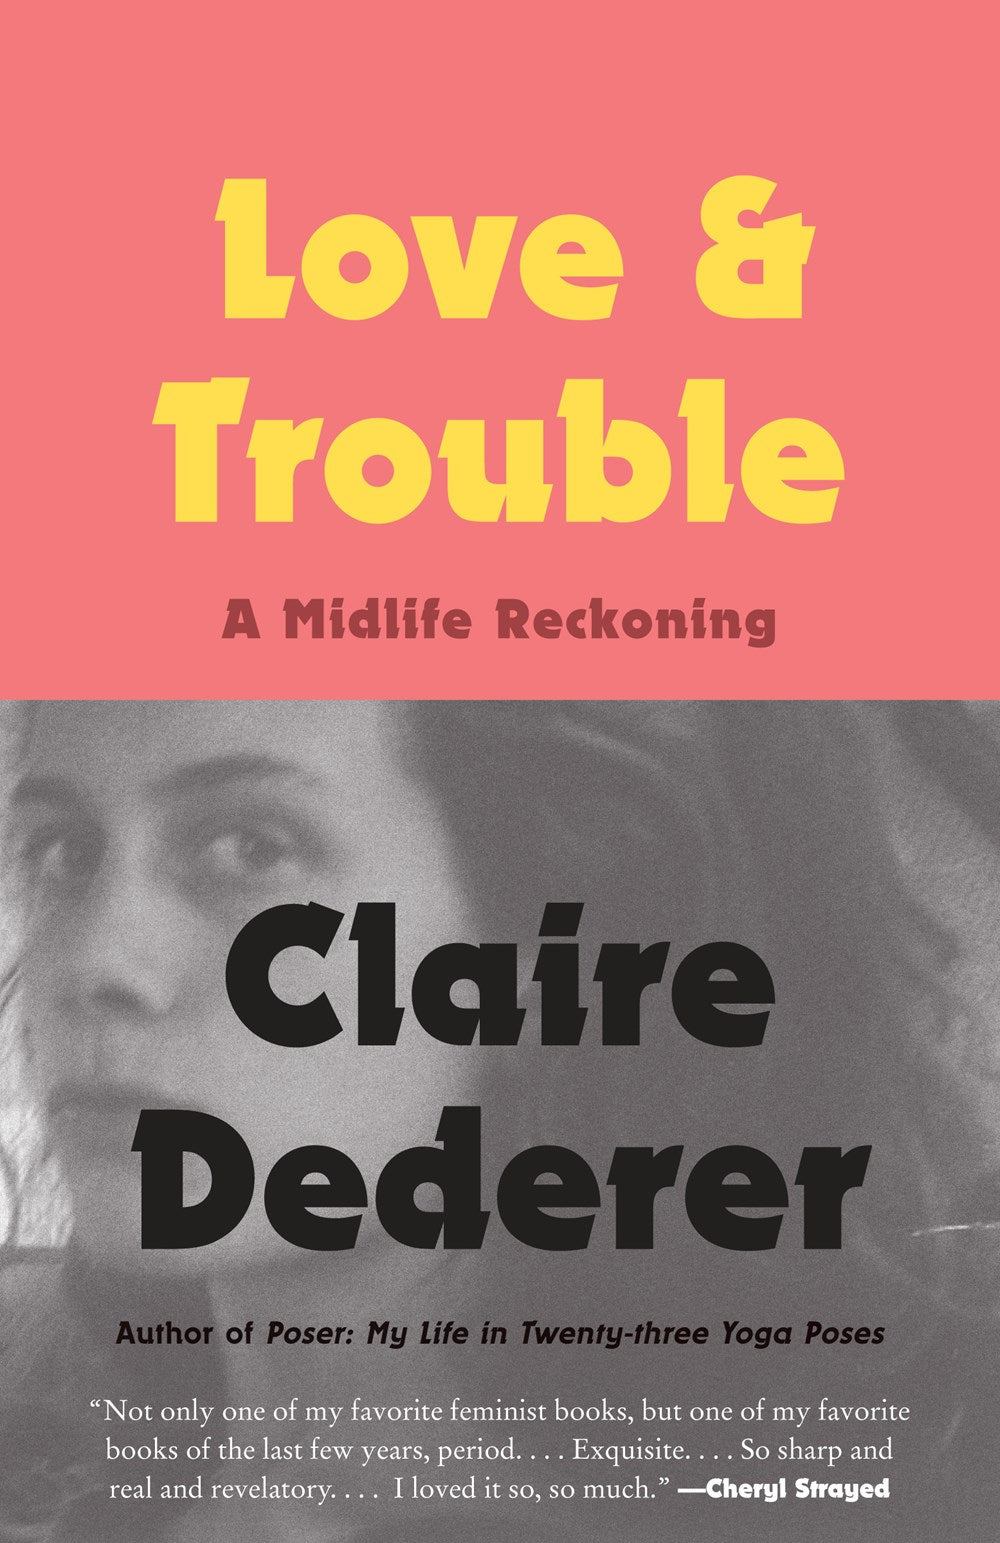 Love & Trouble: A Midlife Reckoning by Claire Dederer